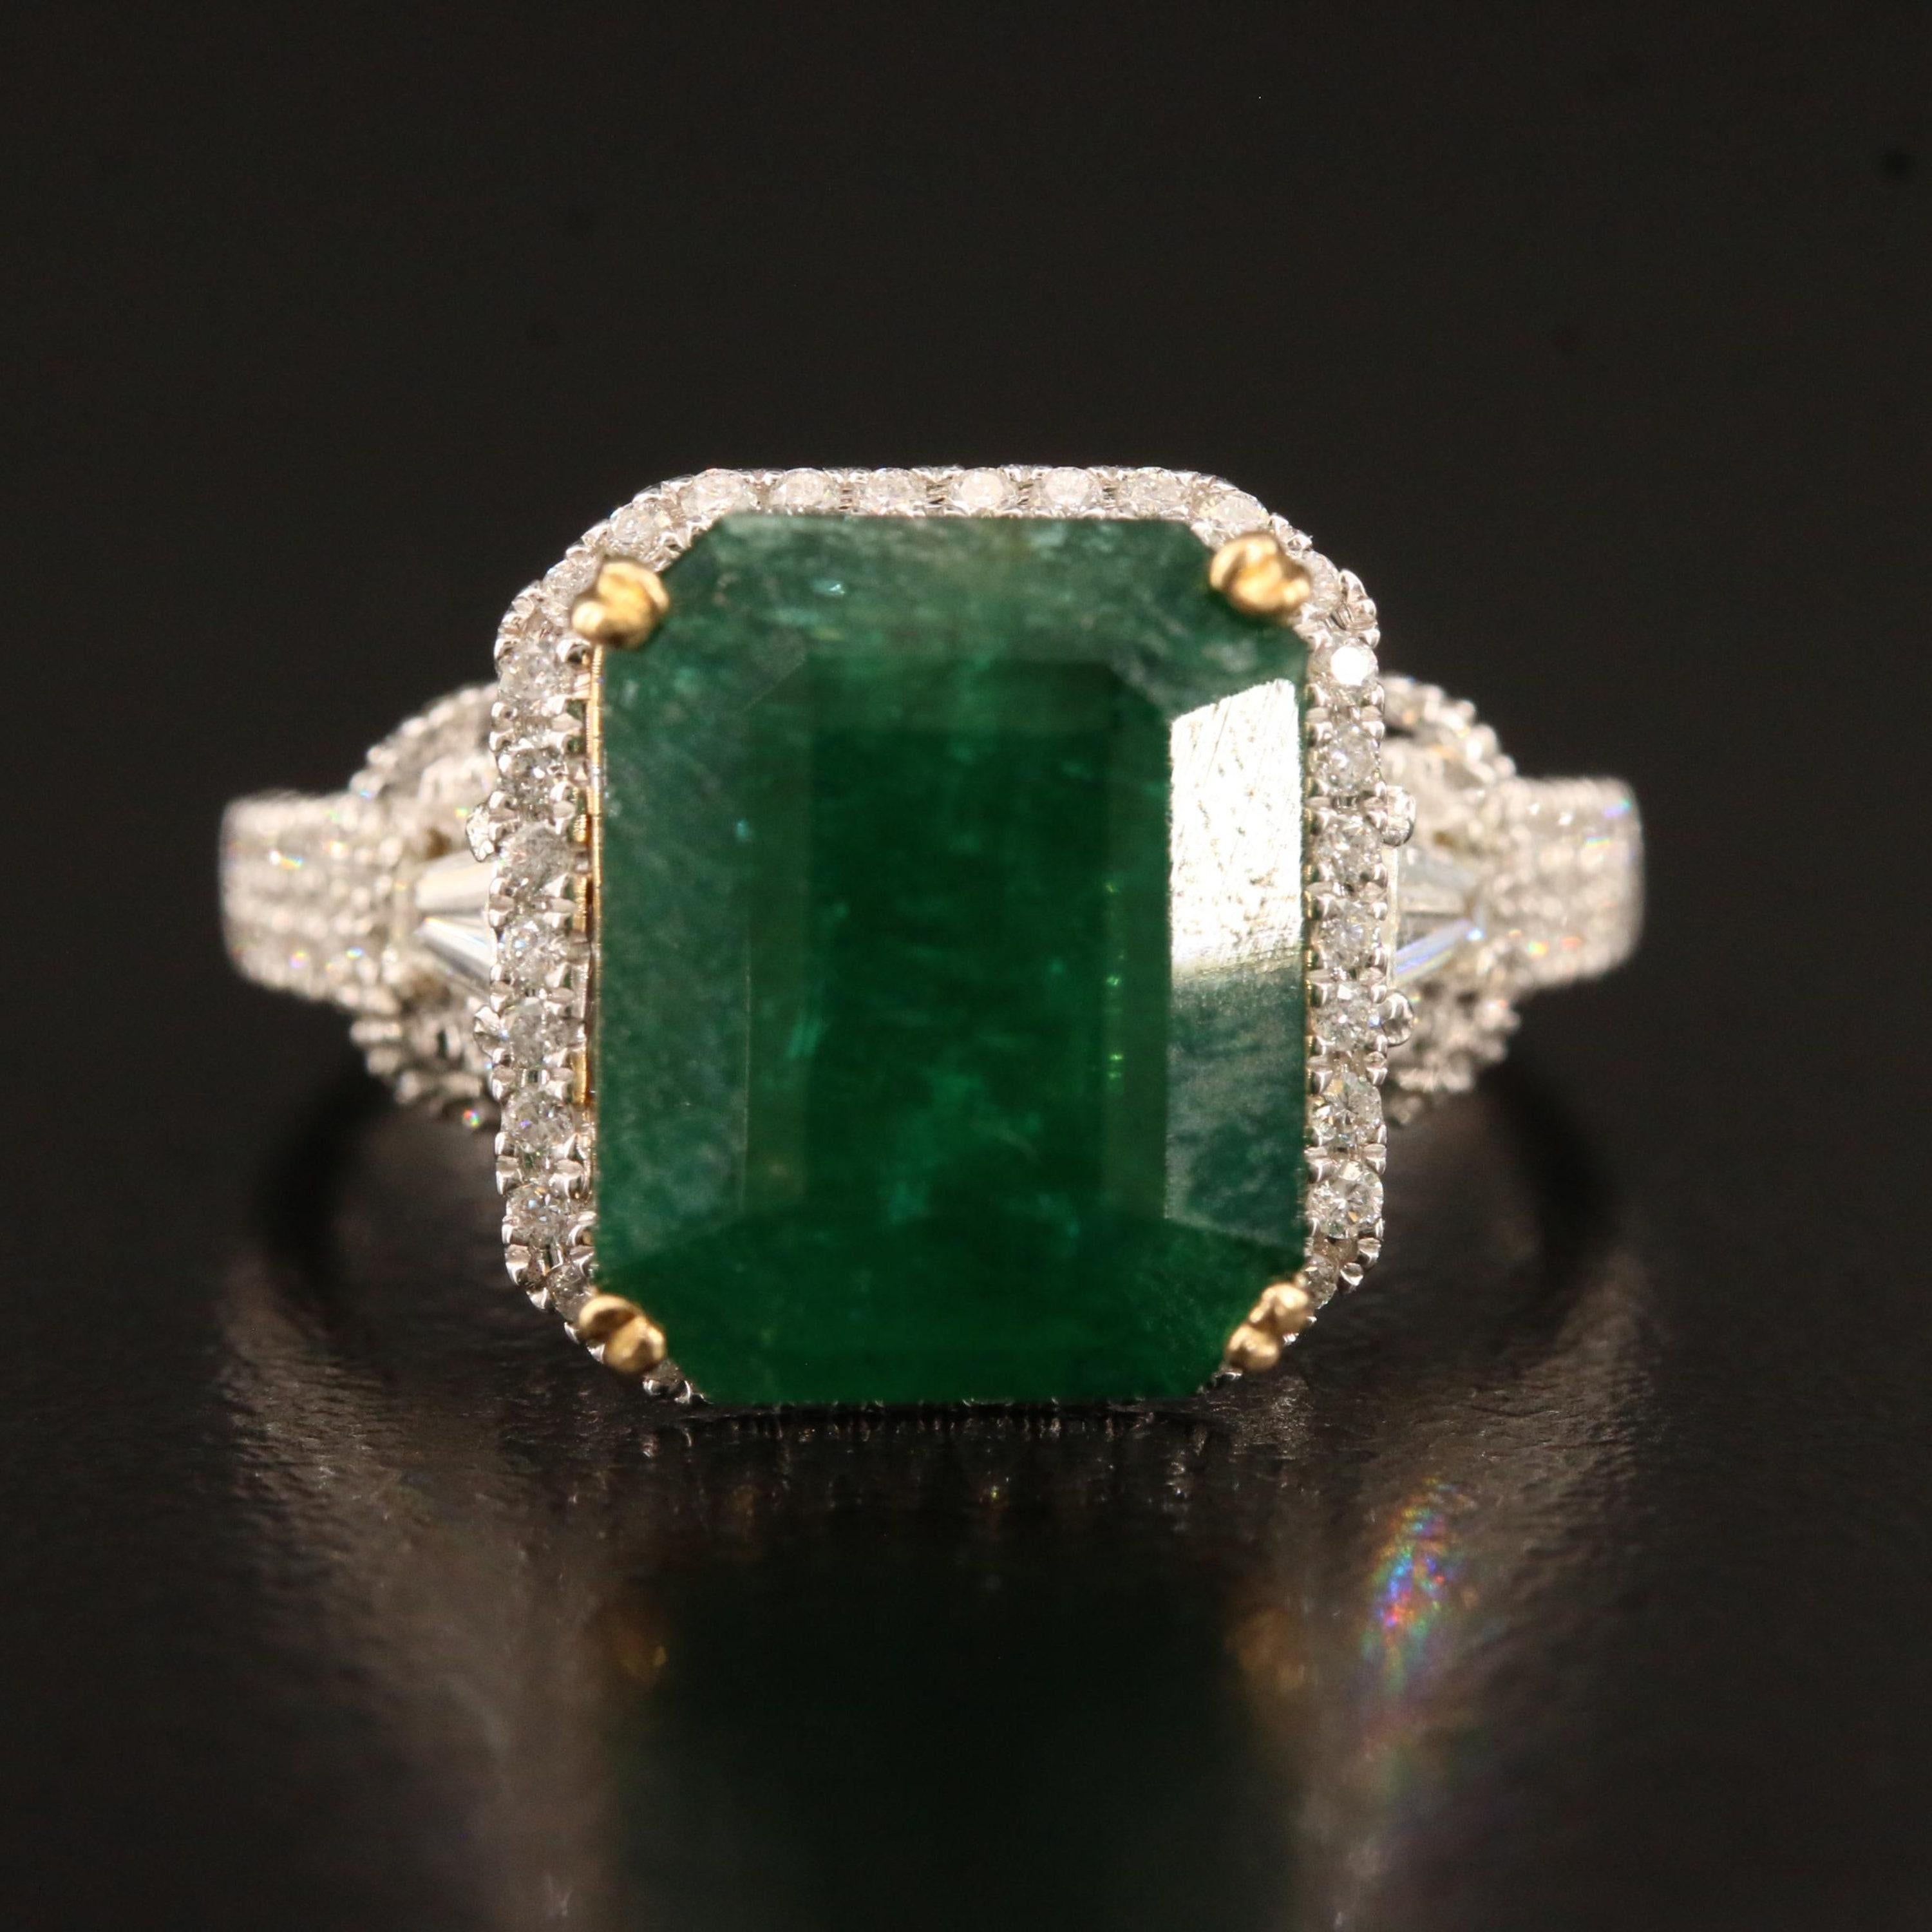 For Sale:  Art Deco 6 CT Natural Emerald Diamond Engagement Ring in 18K Gold, Cocktail Ring 2